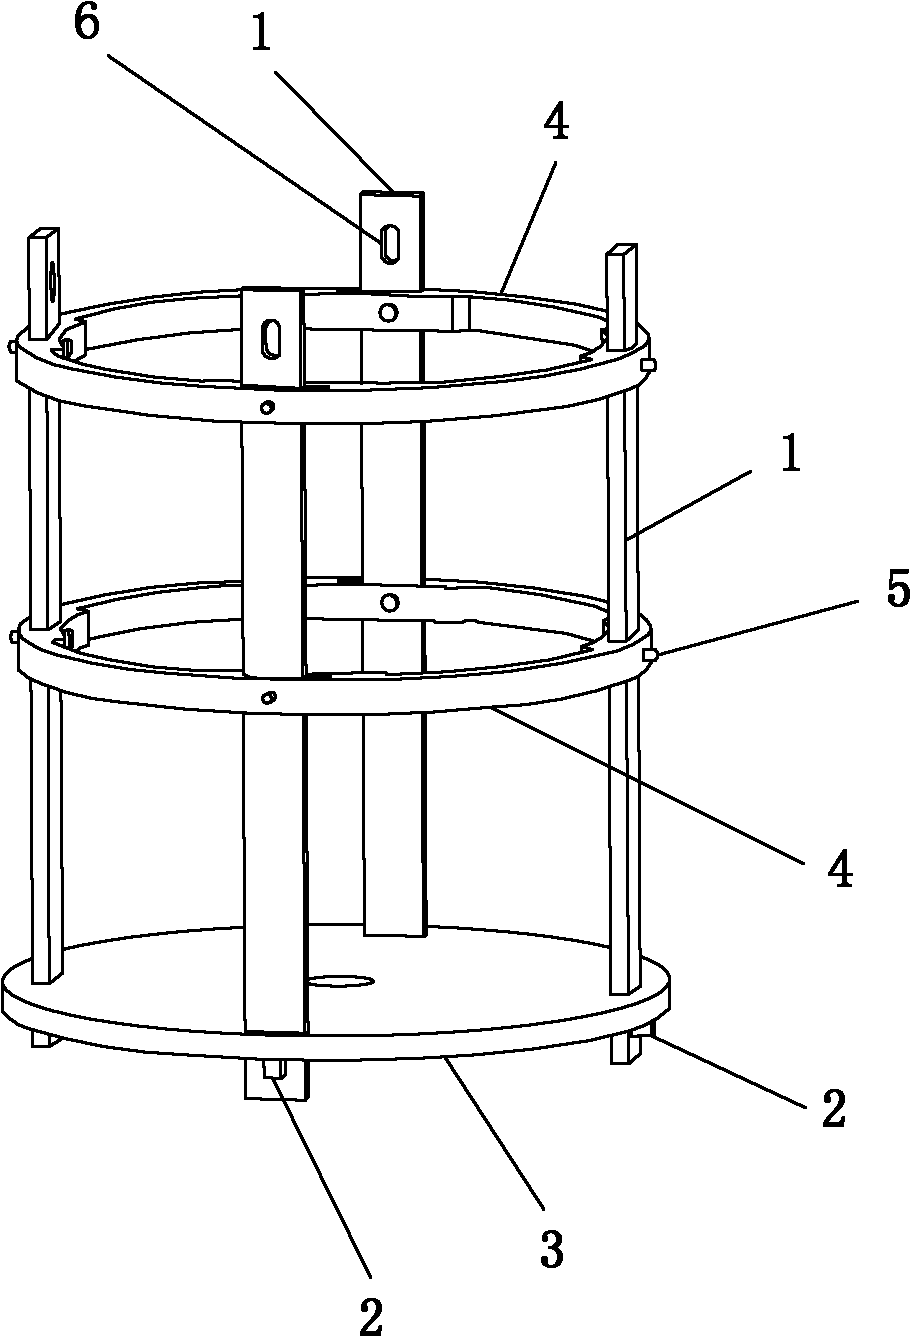 Carbon/carbon composite material lifting appliance for high-temperature furnace